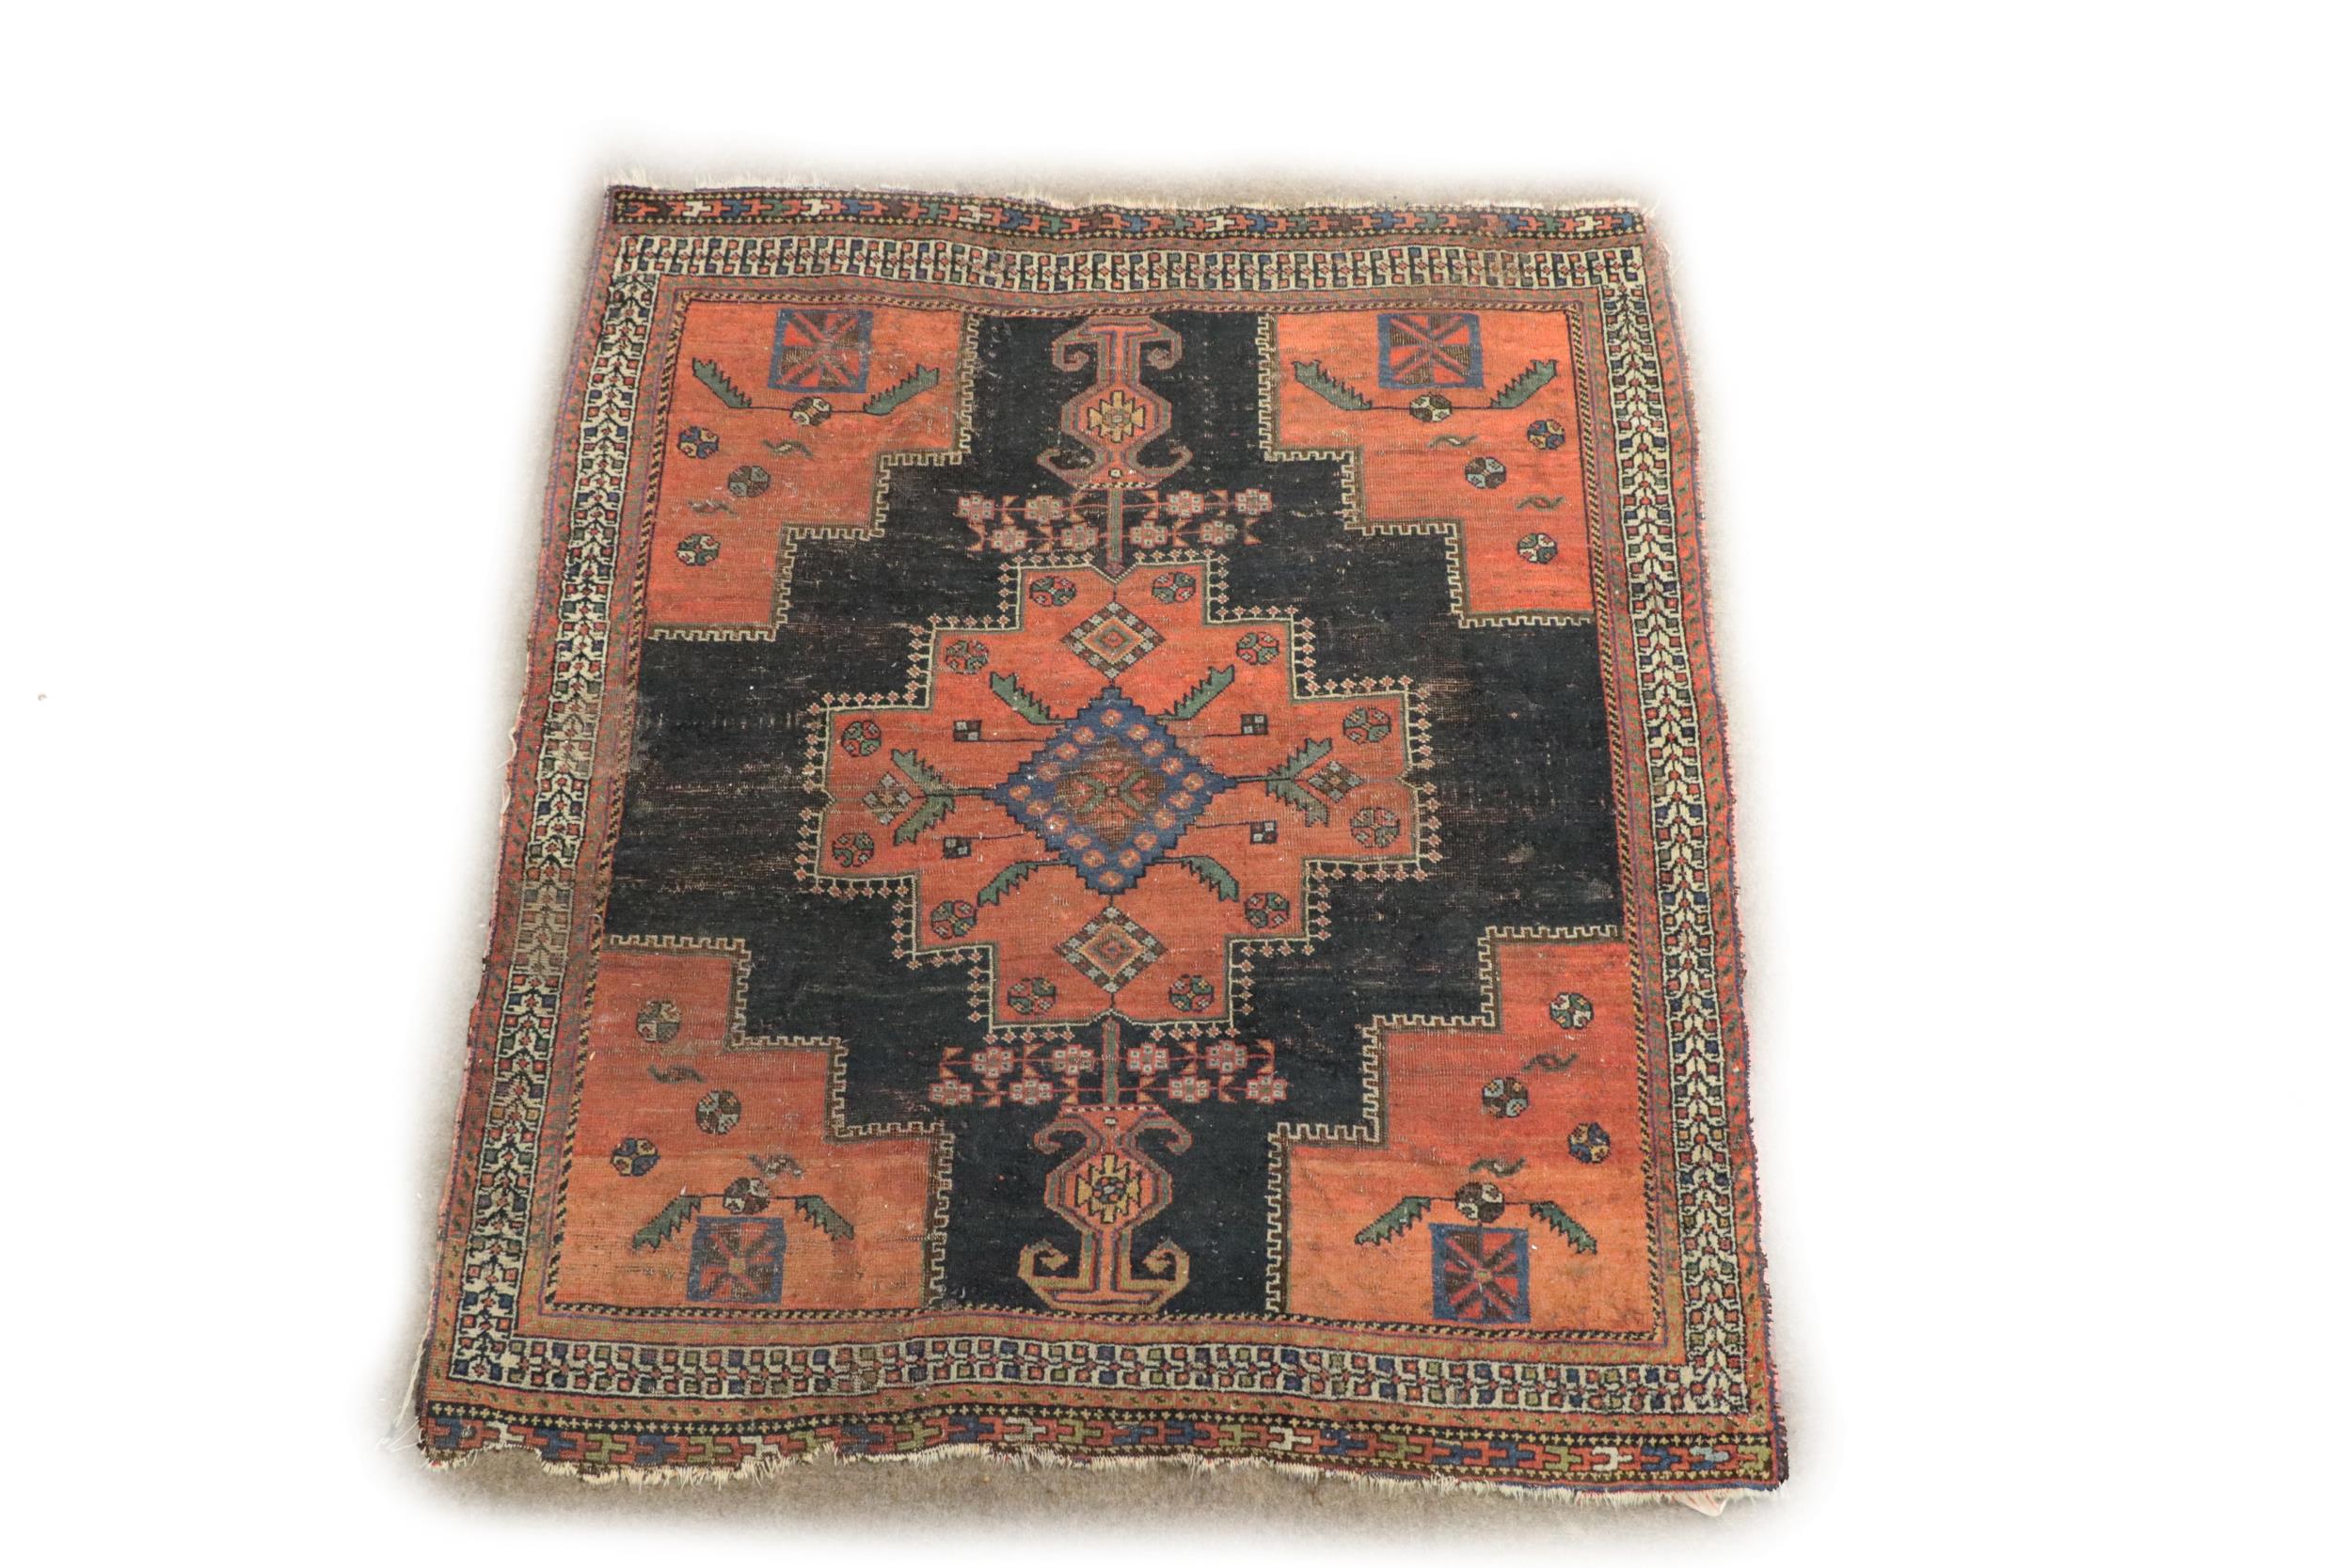 A small antique Middle Eastern Rug, the central navy ground panel with large floral geometric